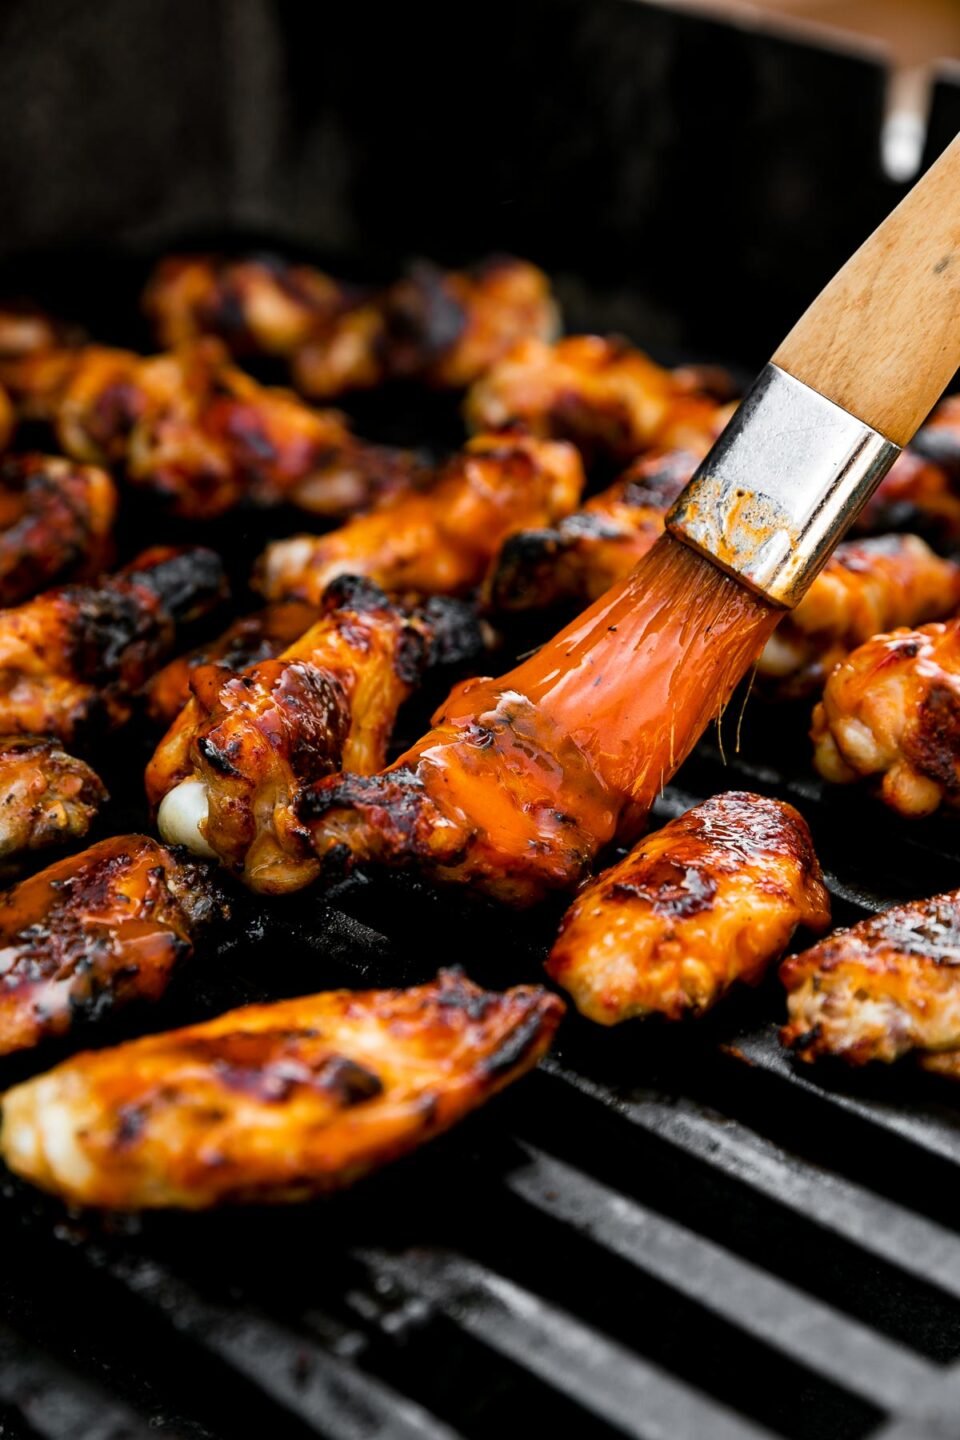 How to make grilled wings, step 4: Char the wings over direct heat. Grilled buffalo wings arranged on a gas grill over direct heat to char grill them. A pastry brush brushes additional Frank's RedHot over the wings.